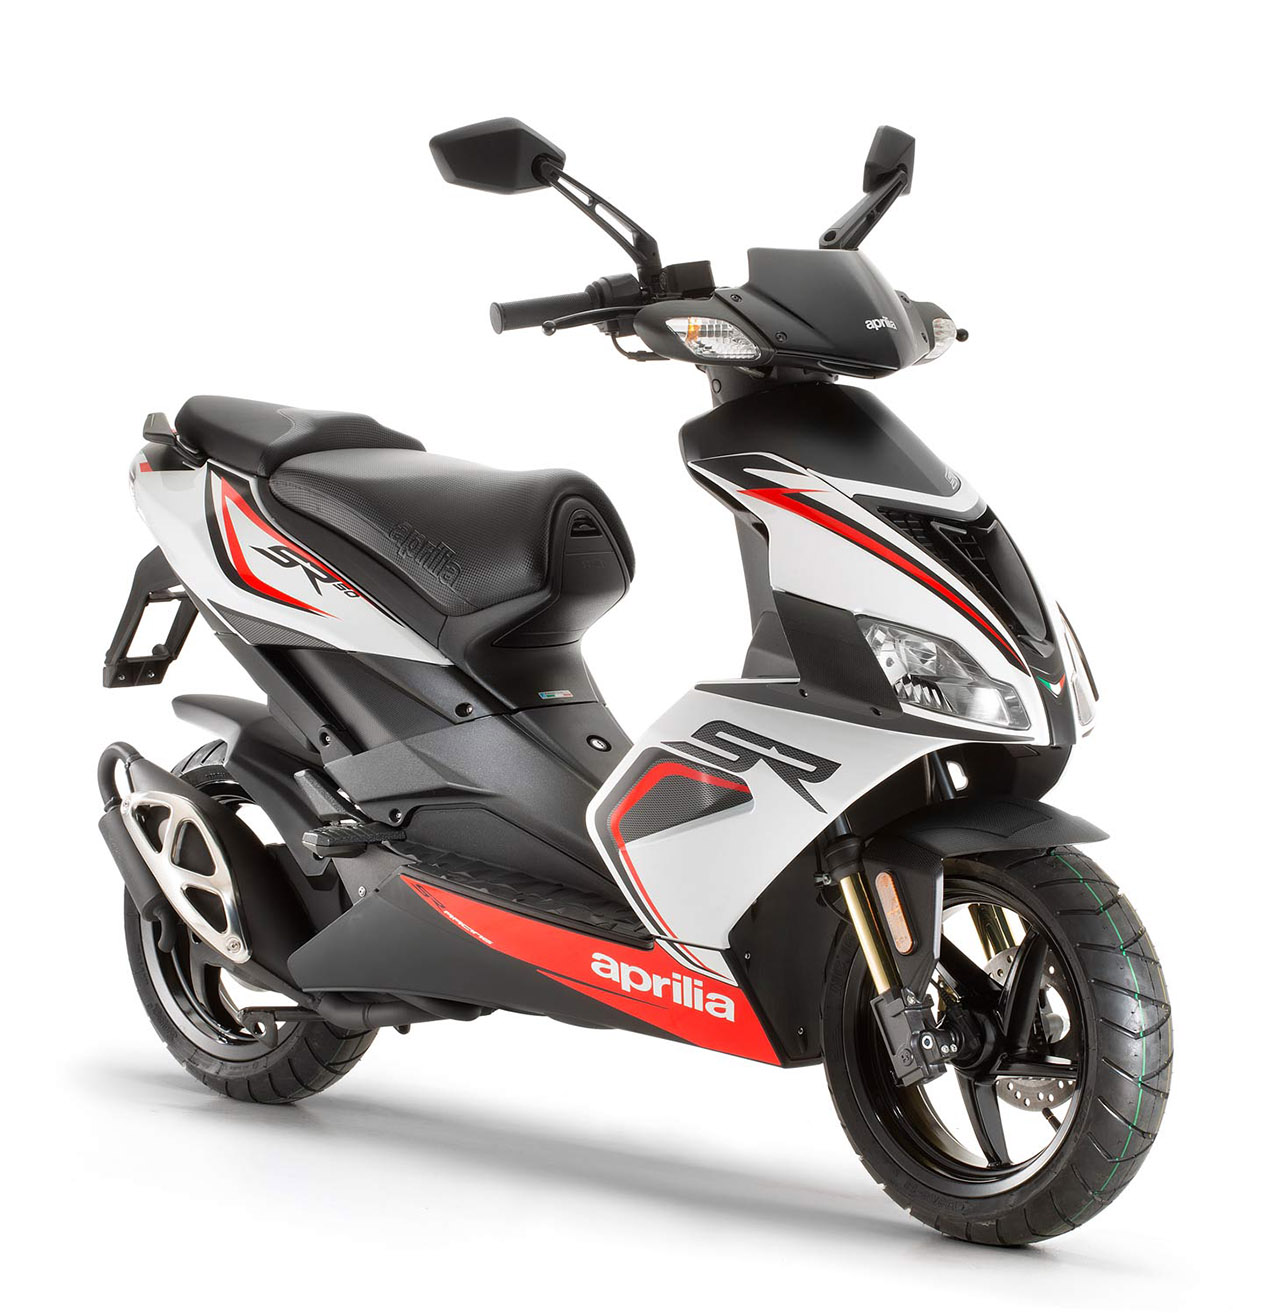 Which are the top 3 lightest 50cc motor scooters? - Quora